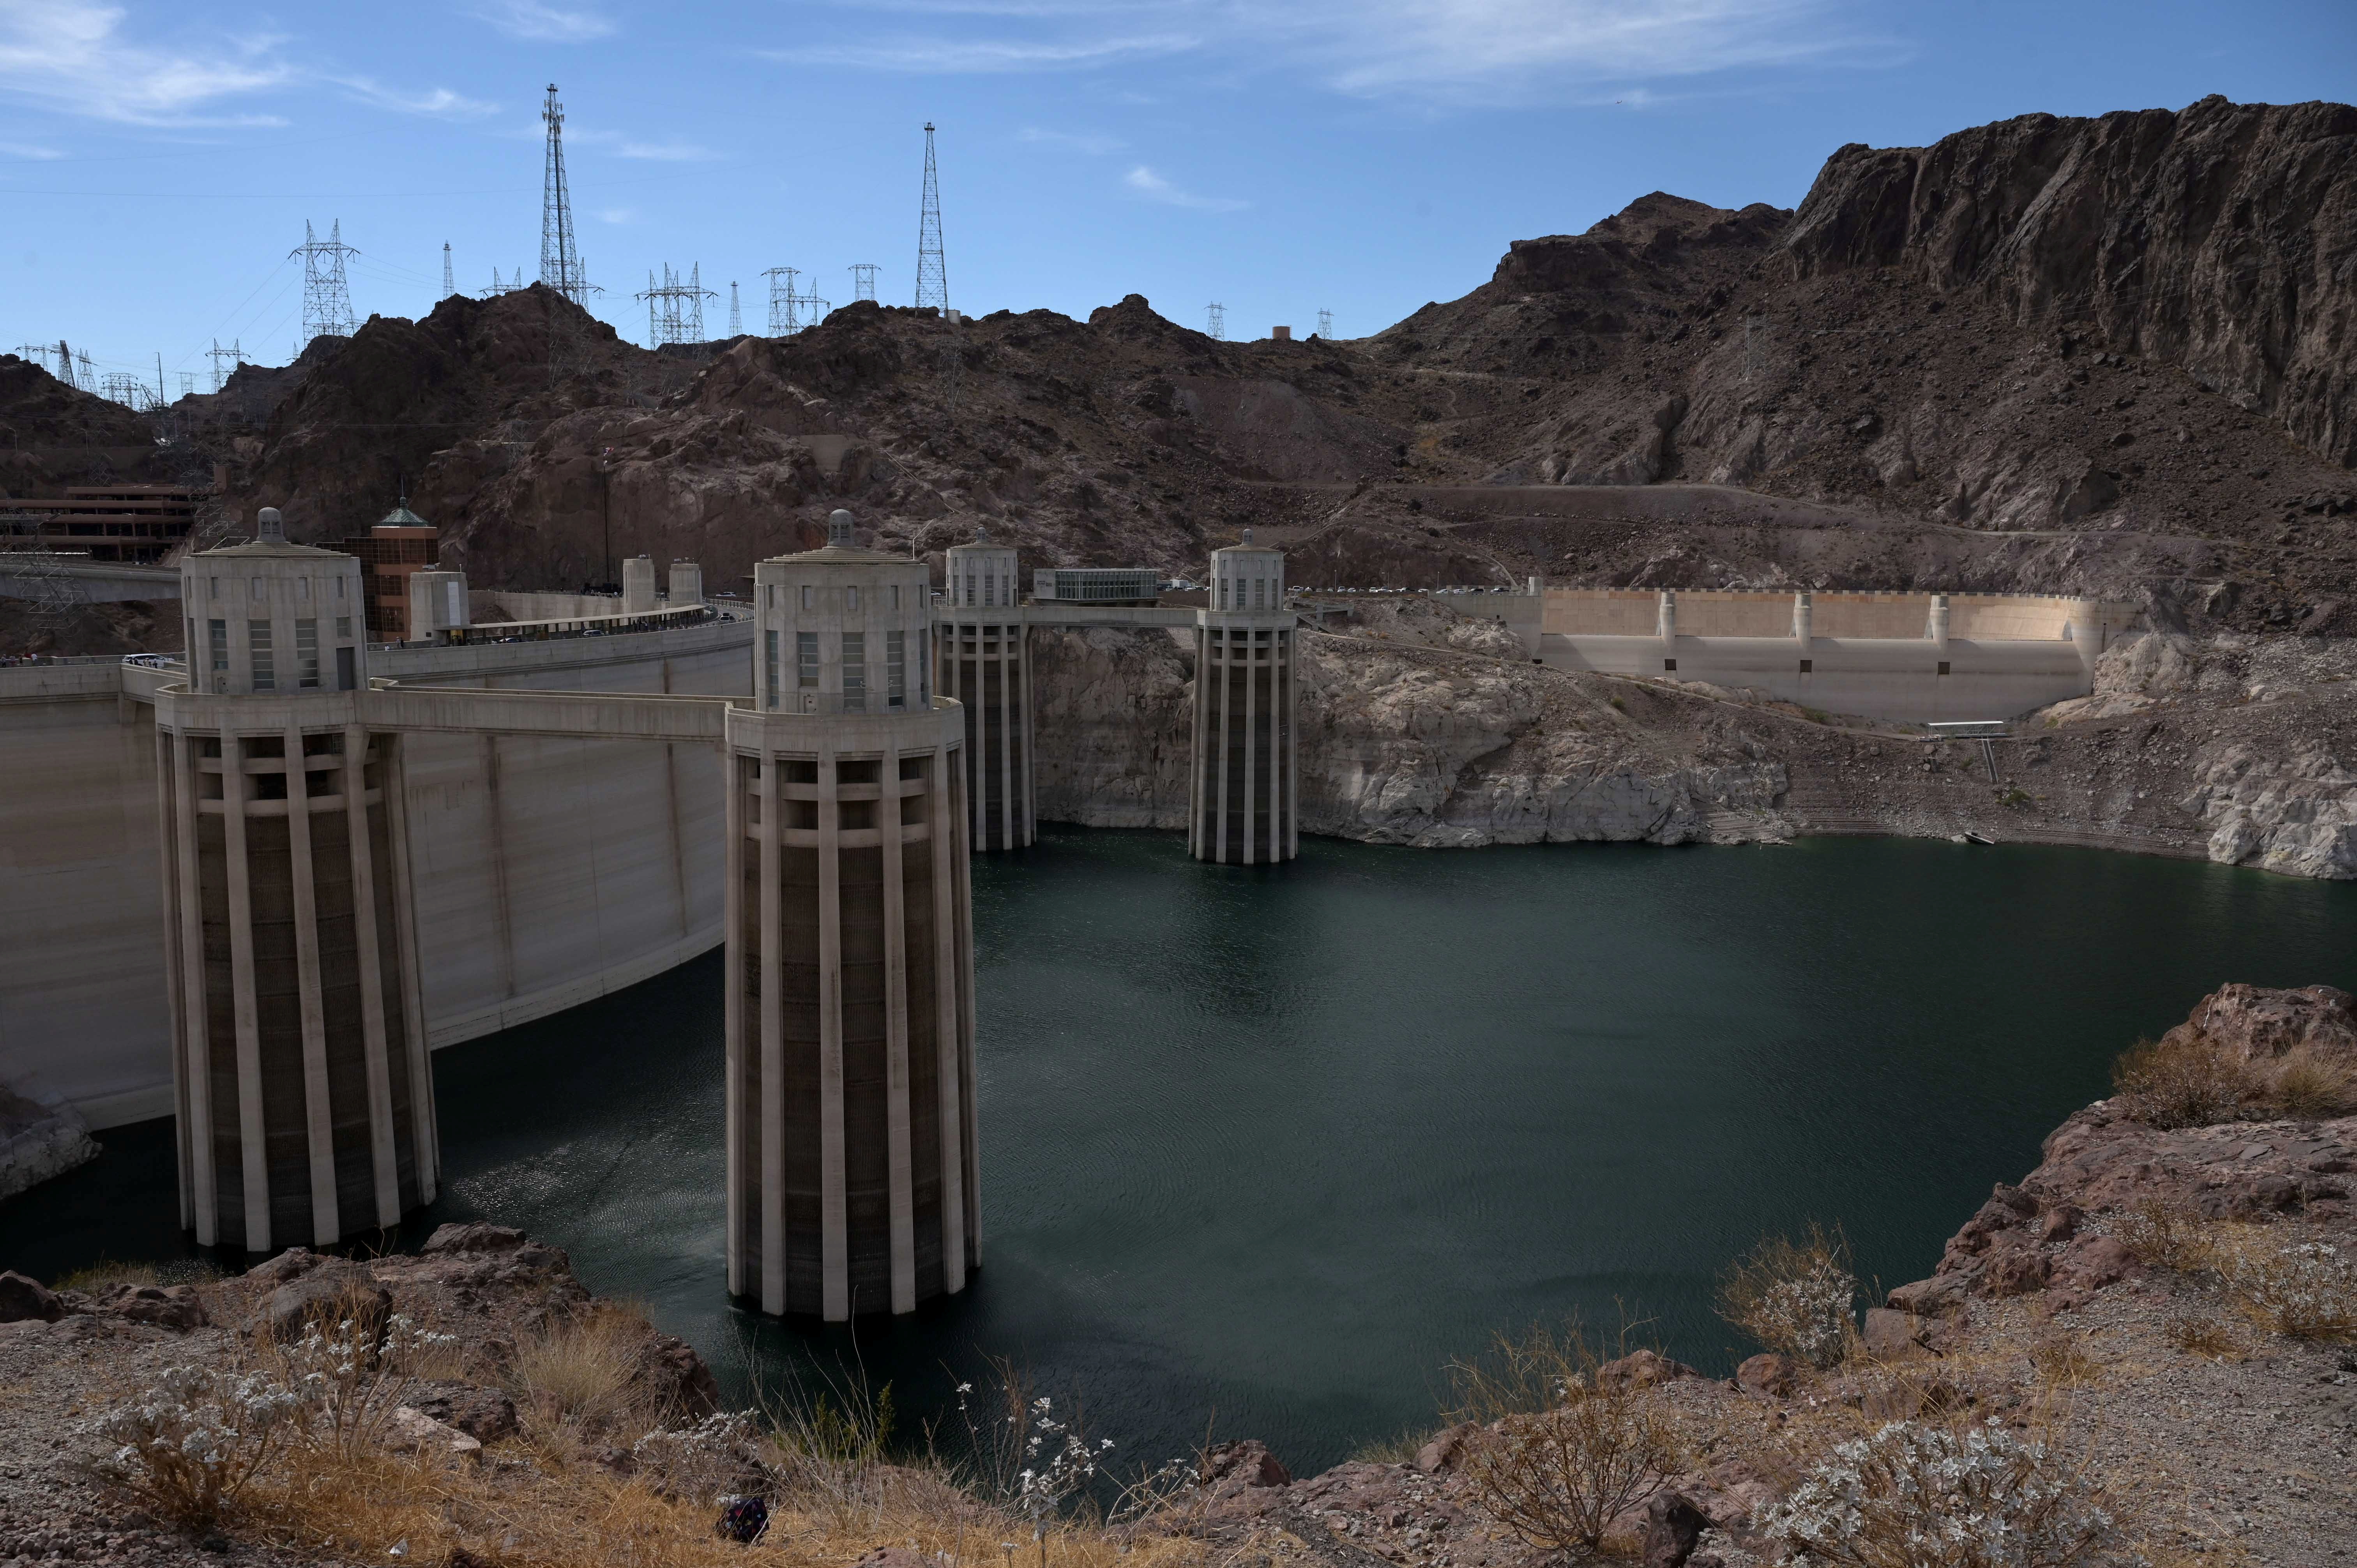 Hoover Dam reservoir sinks to record low, in sign of extreme Western U.S. drought